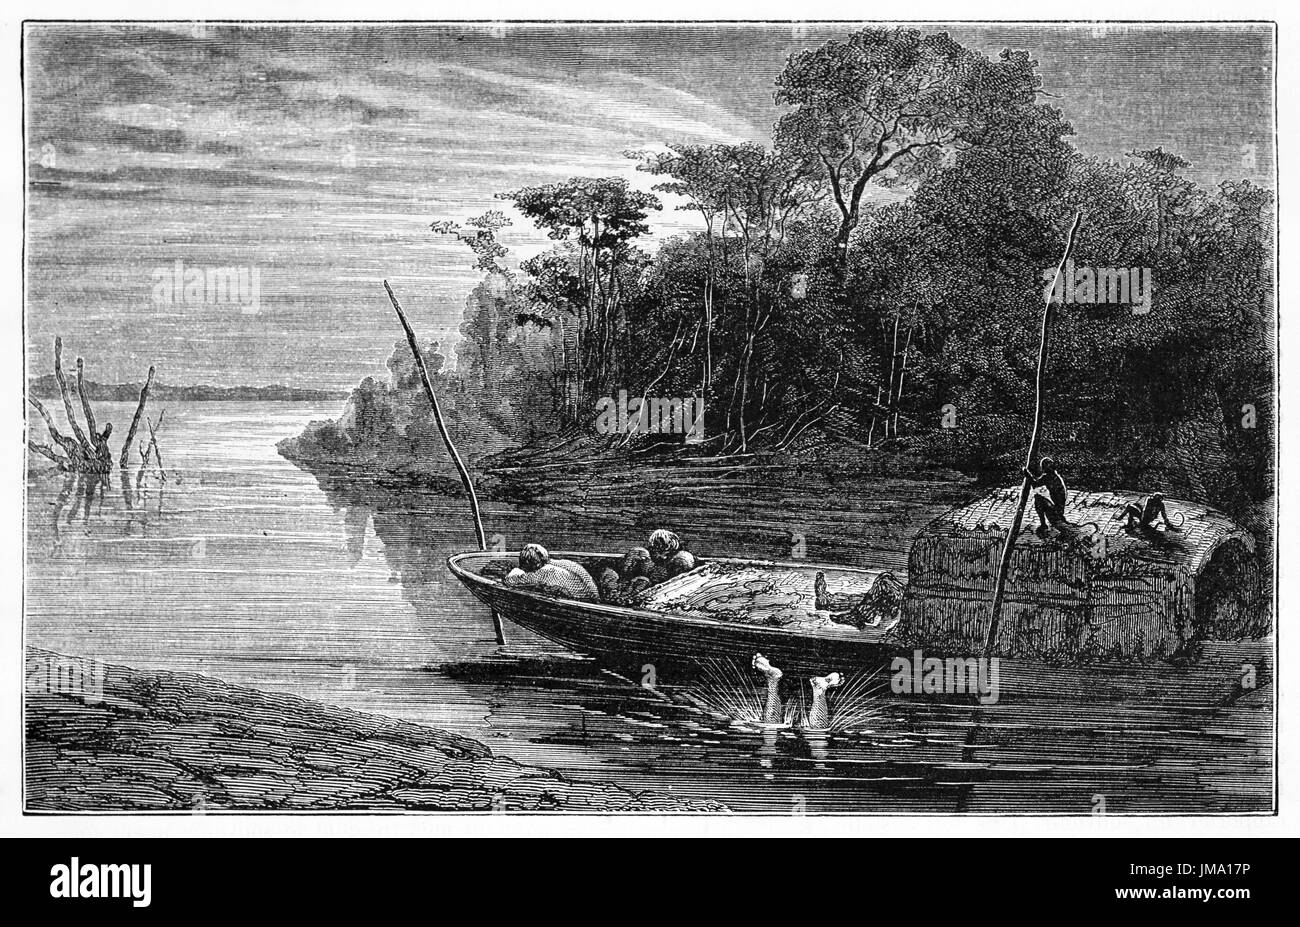 Old illustration of a man falling in water from a boat in Amazon river. Created by Riou, Biard and Maurand, published on Le Tour du Monde, Paris, 1861 Stock Photo